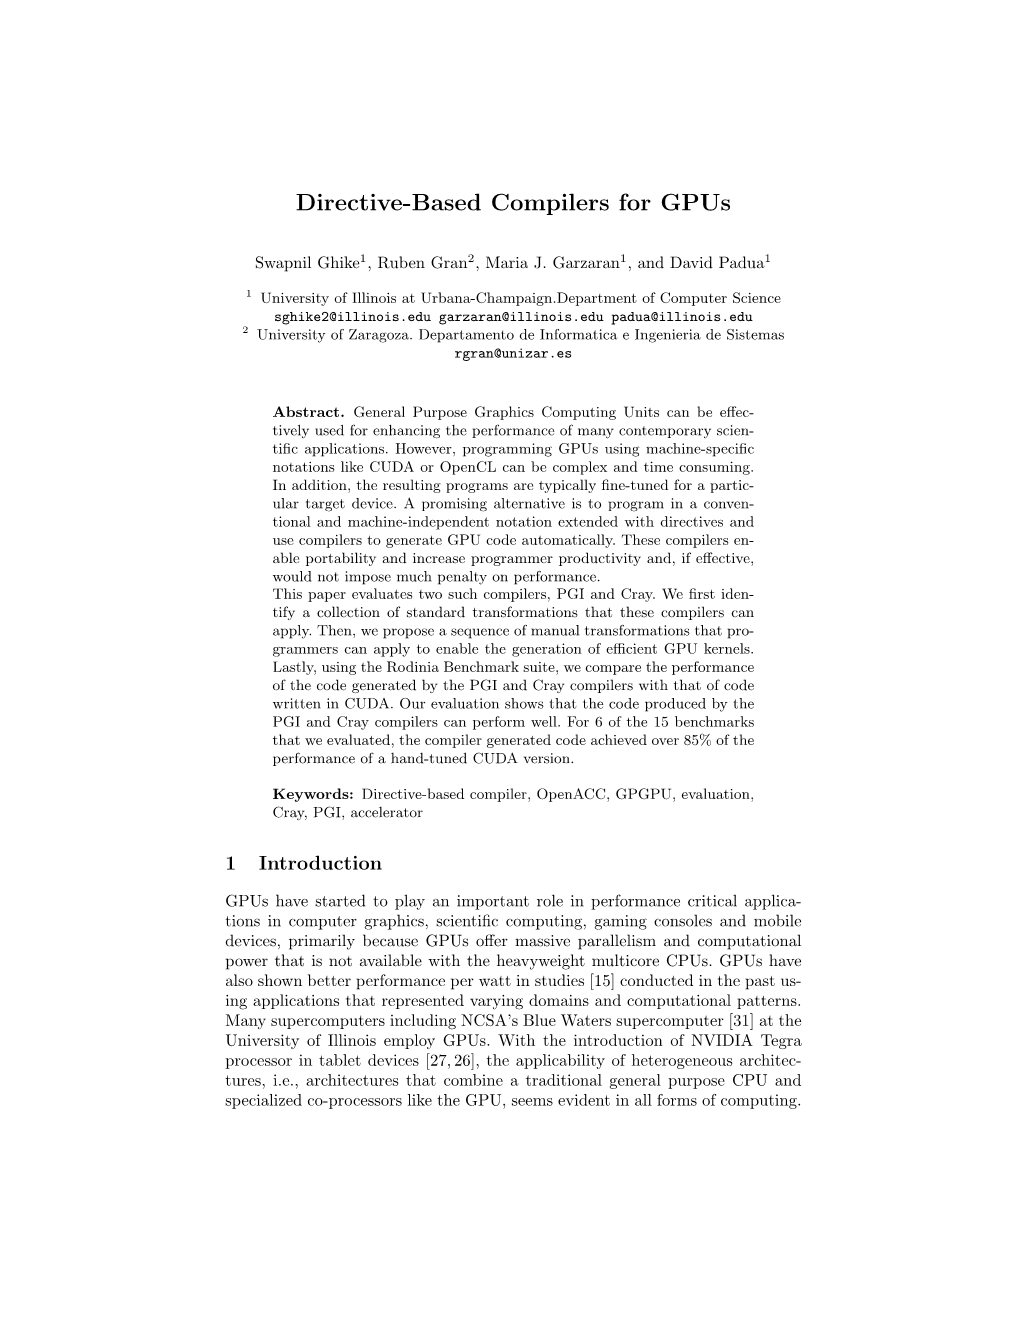 Directive-Based Compilers for Gpus